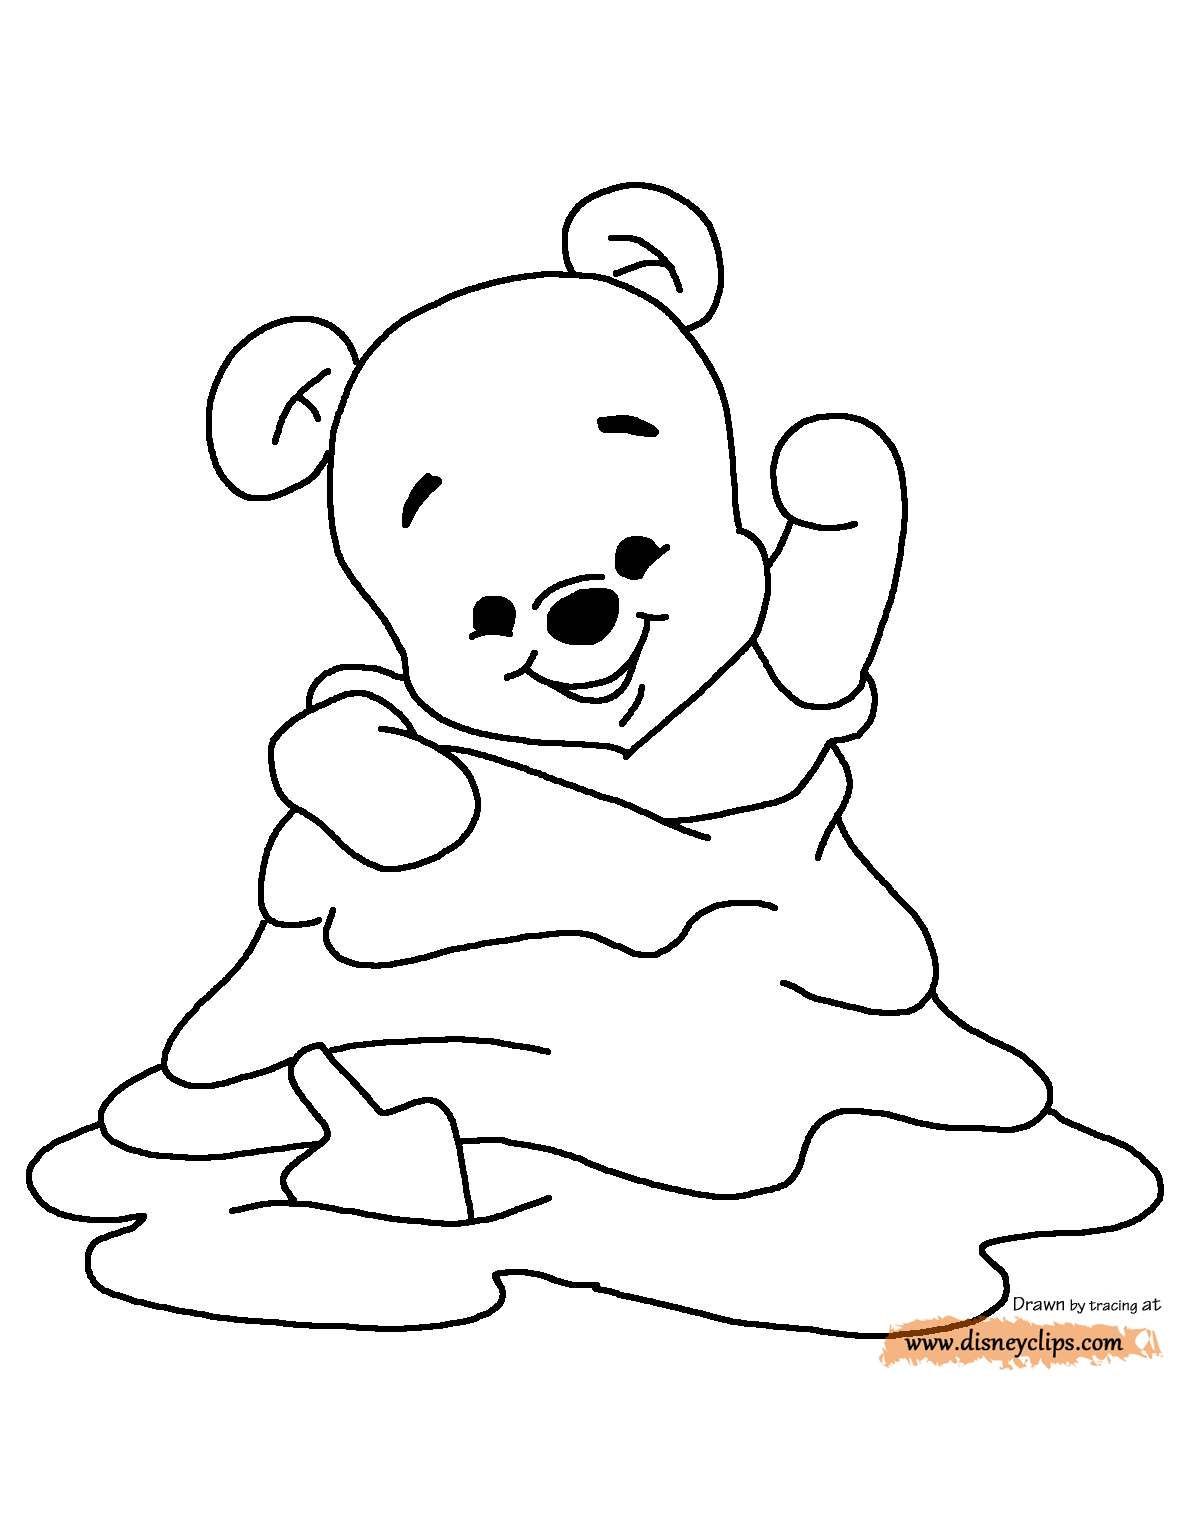 free winnie the pooh coloring sheets free printable winnie the pooh coloring pages for kids the pooh sheets free winnie coloring 1 1